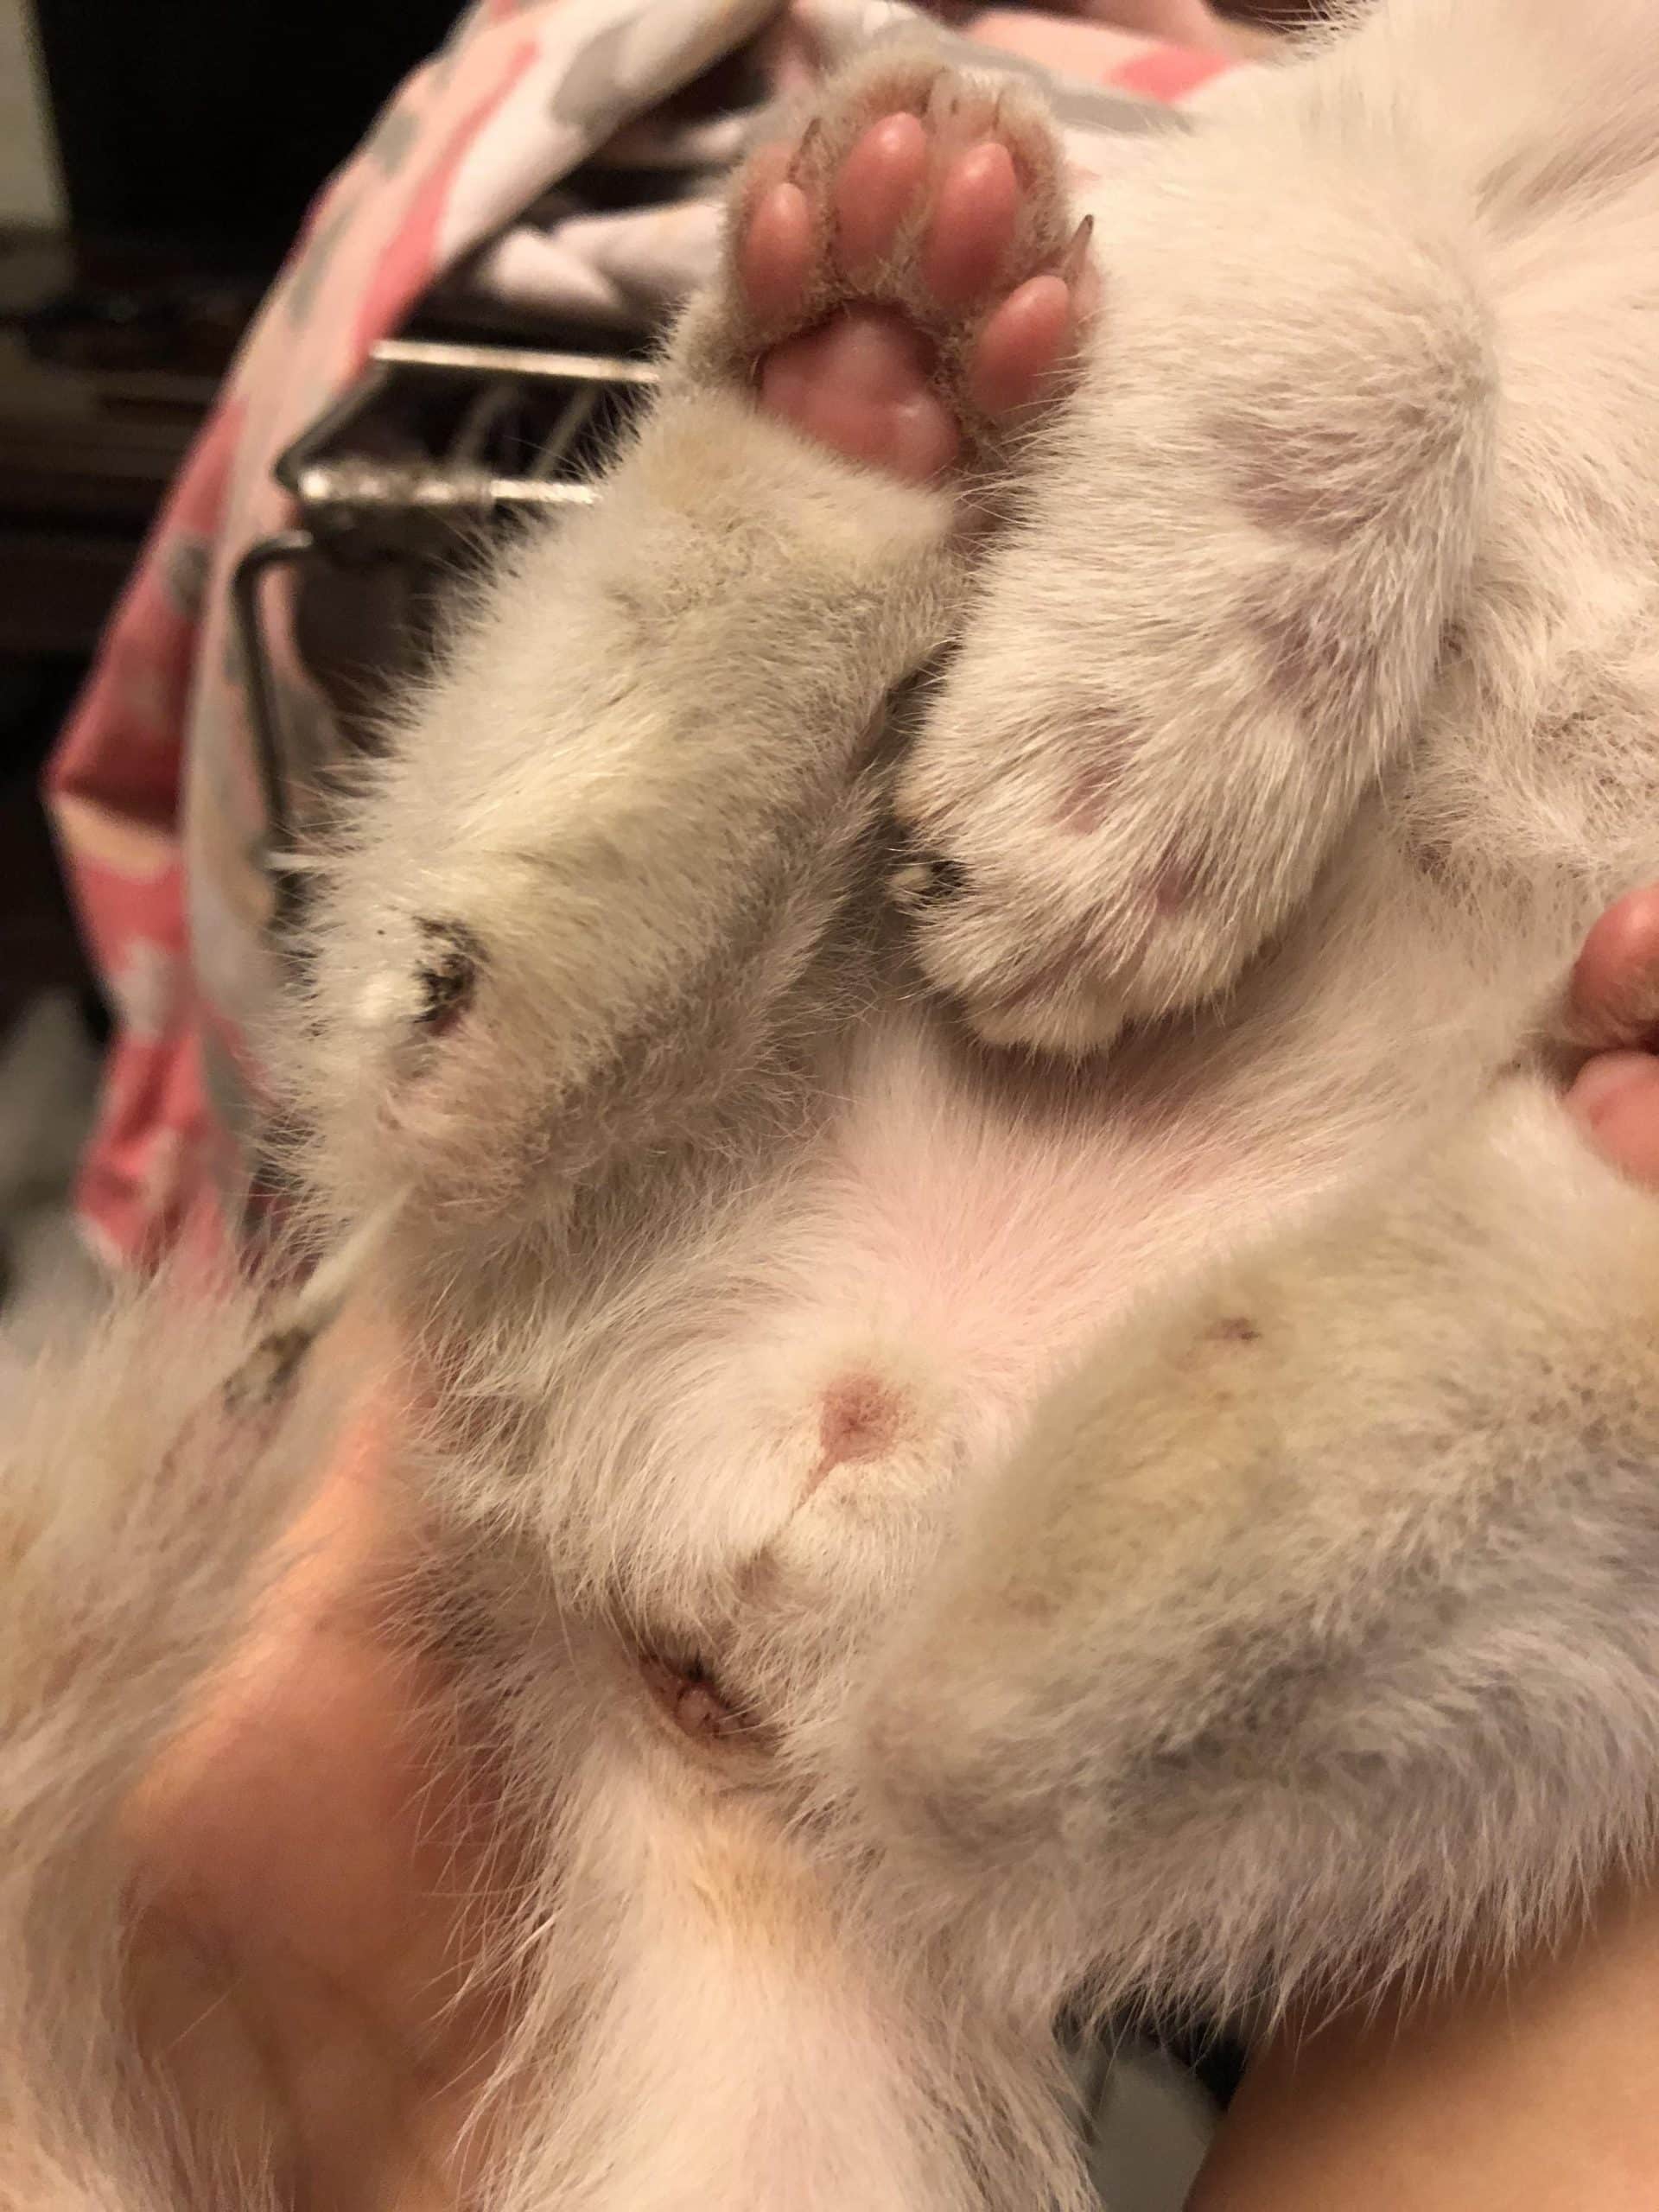 Can someone please help identify the gender of this kitten?